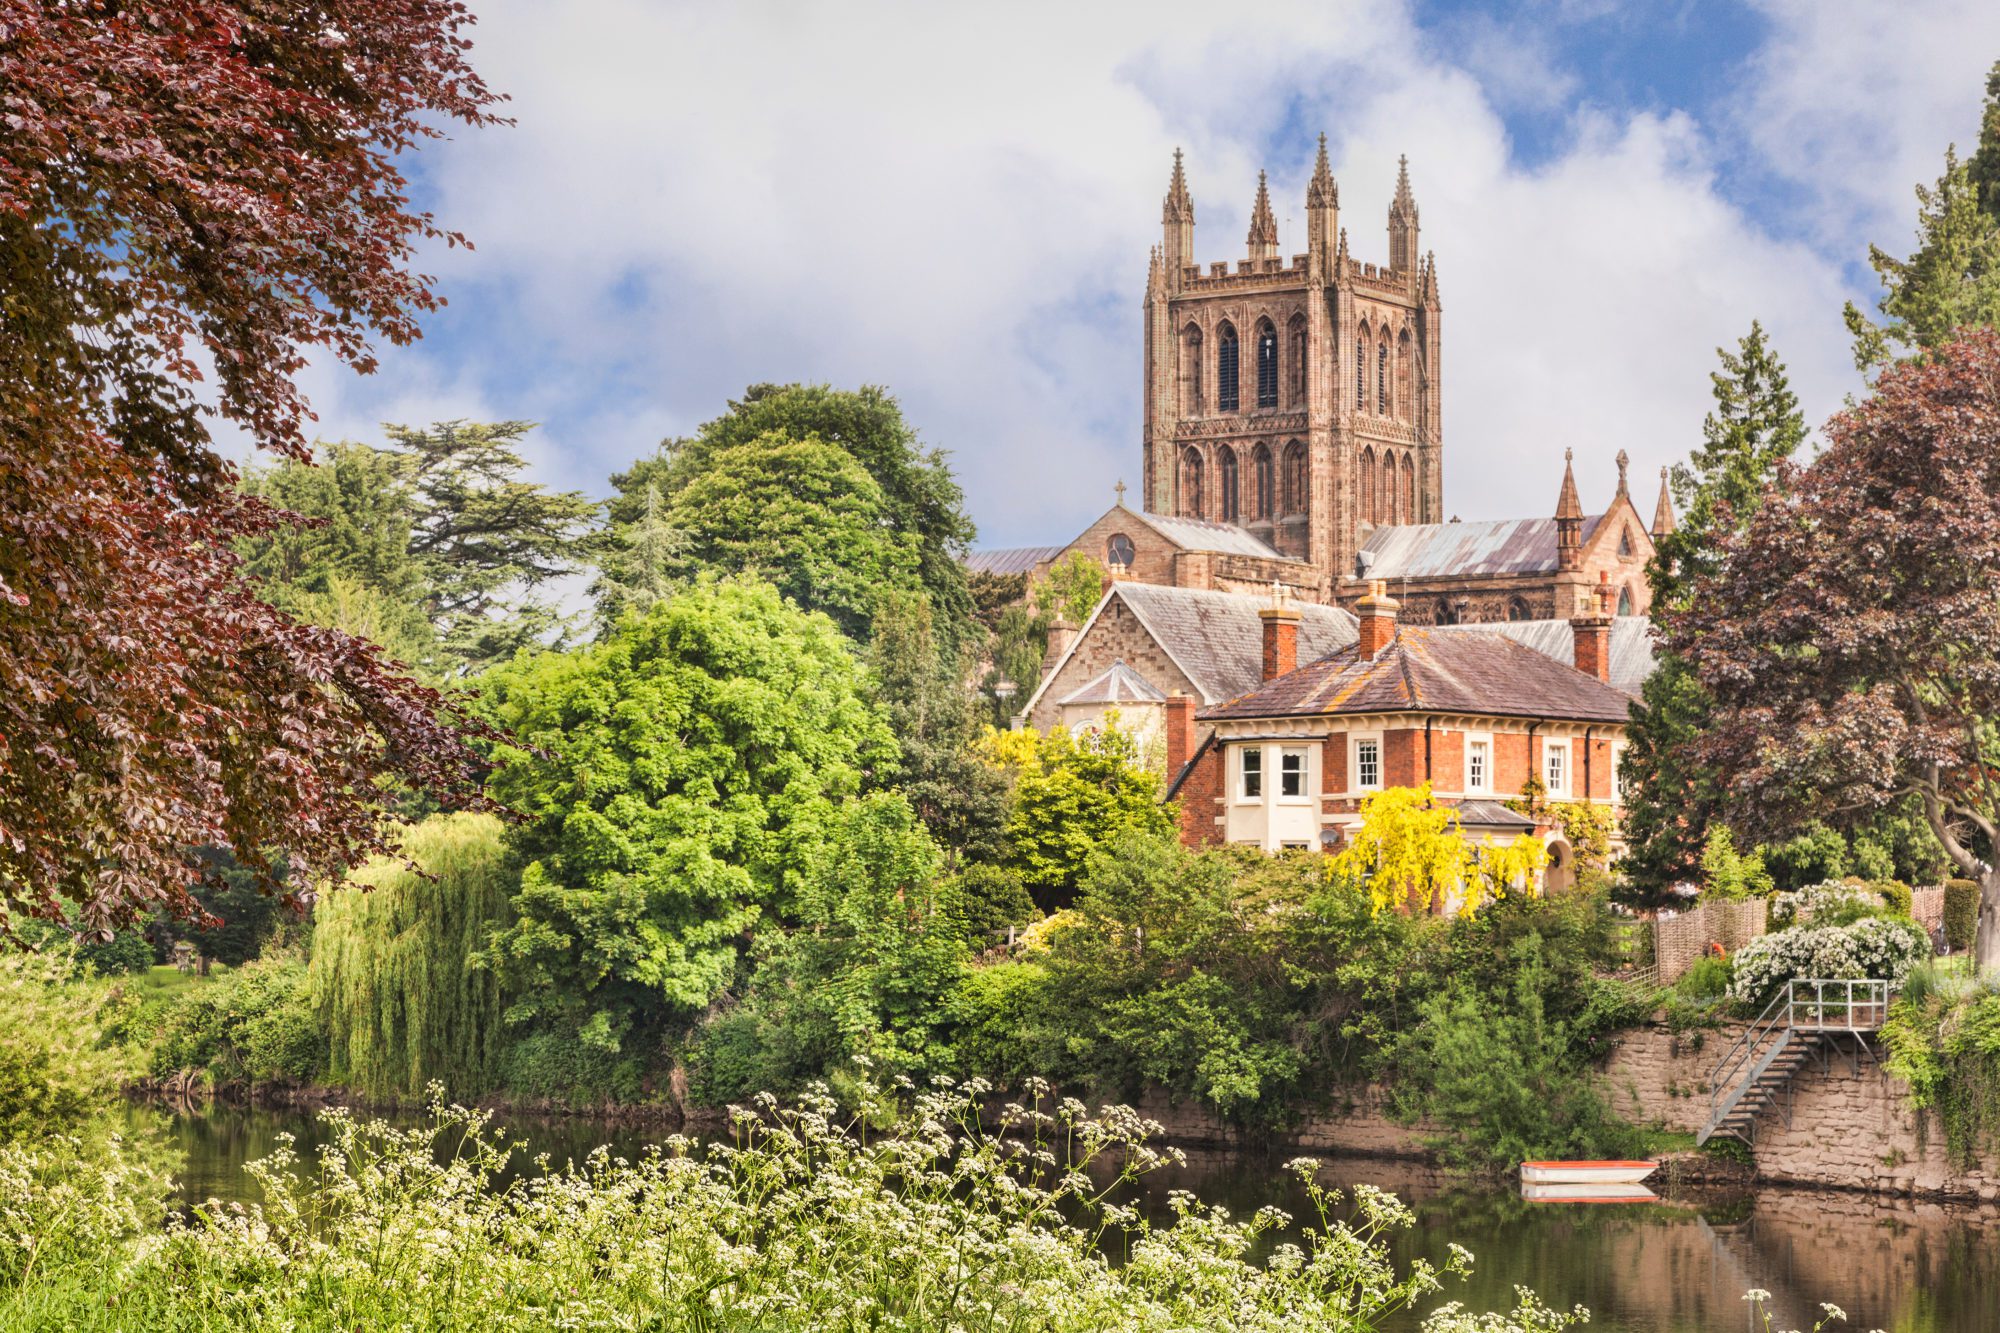 Hereford Cathedral and the River Wye image Adobe Stock